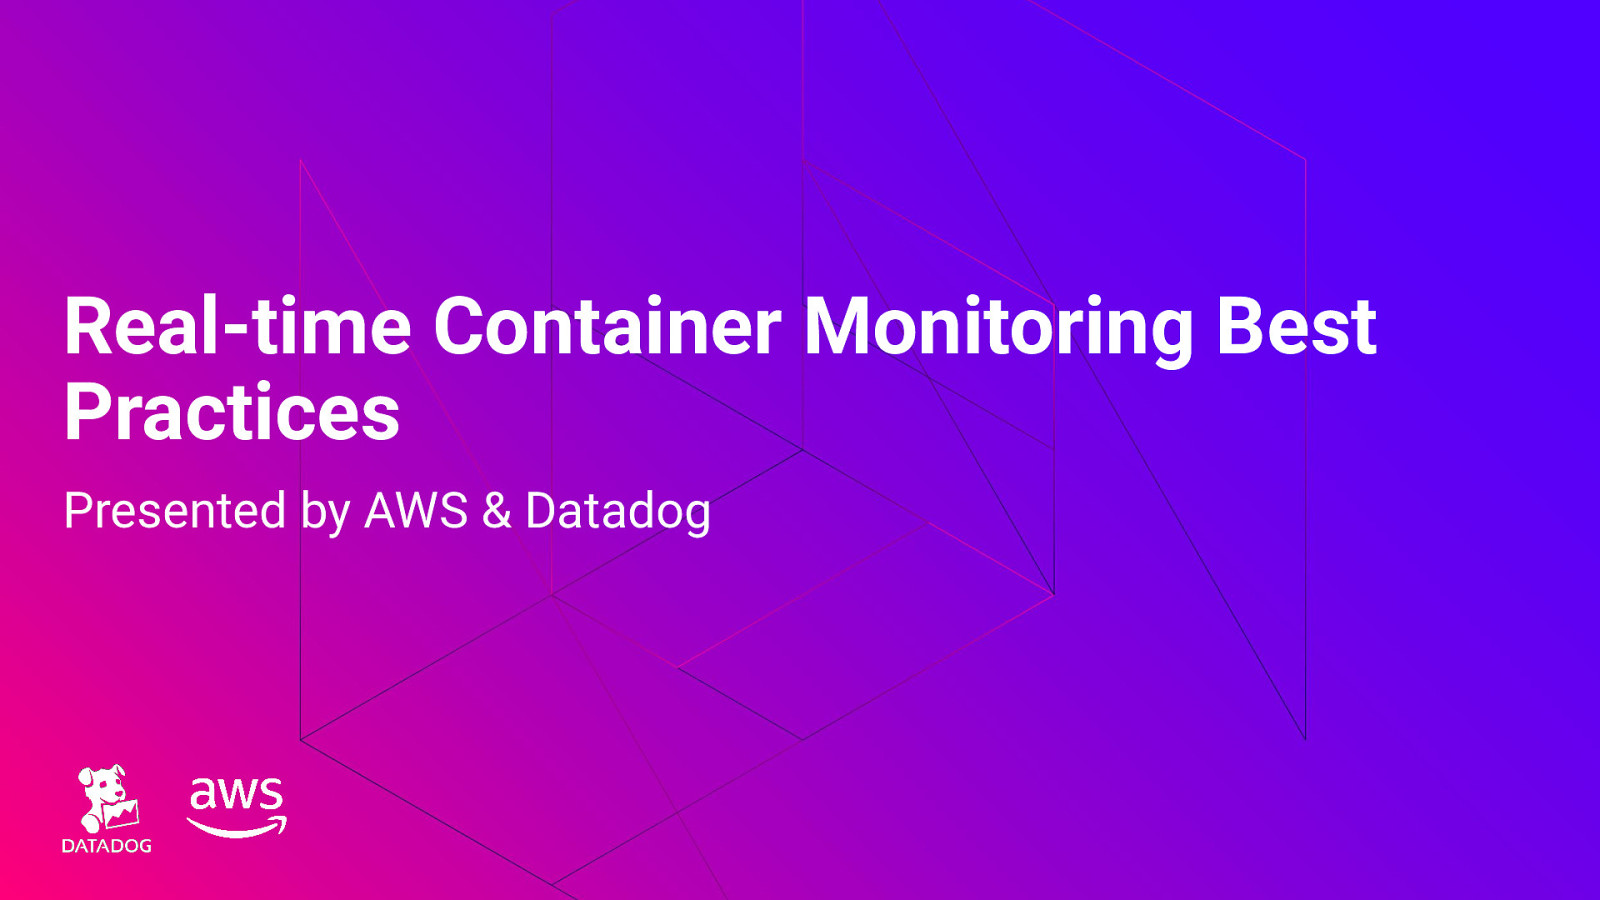 Real-time Container Monitoring Best Practices